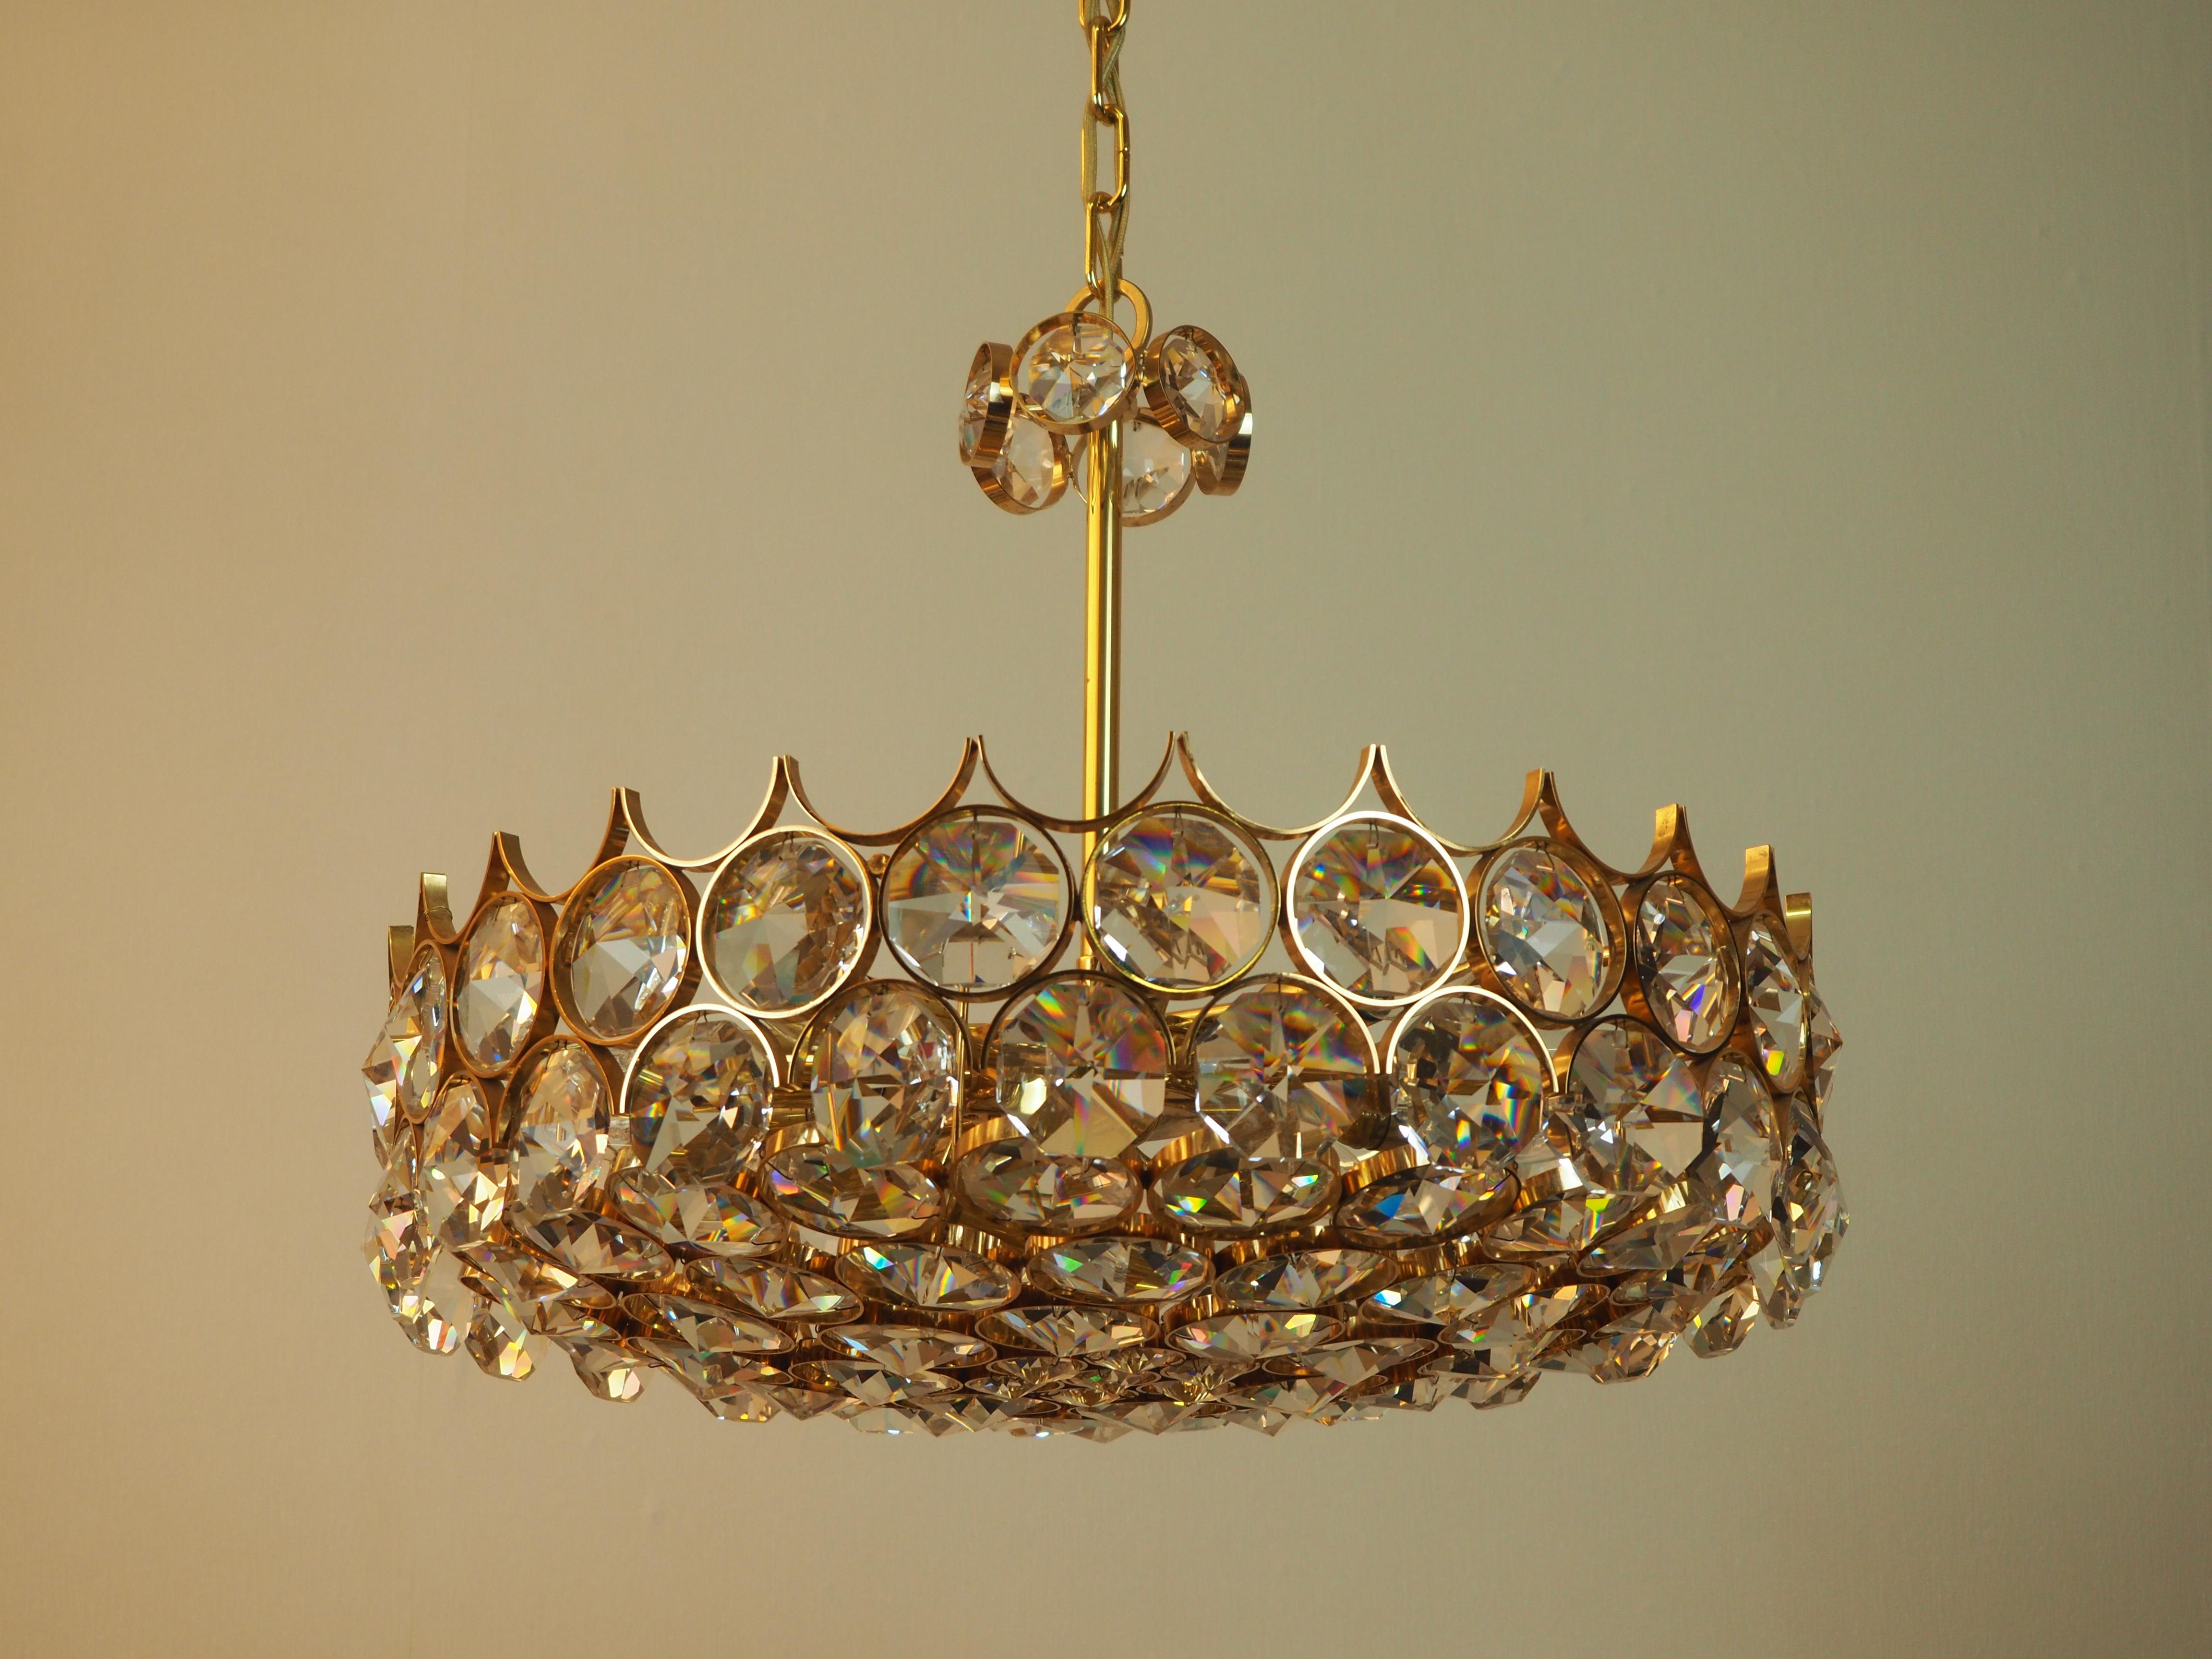 A wonderful midcentury gilt brass and crystal chandelier by Palwa, Germany, circa 1970s.
A highest quality light fixture made of 24-karat gilt brass and big a Swarovski crystal pieces.
The chandelier needs 11 x e14 (Edison) standard screw bulbs to